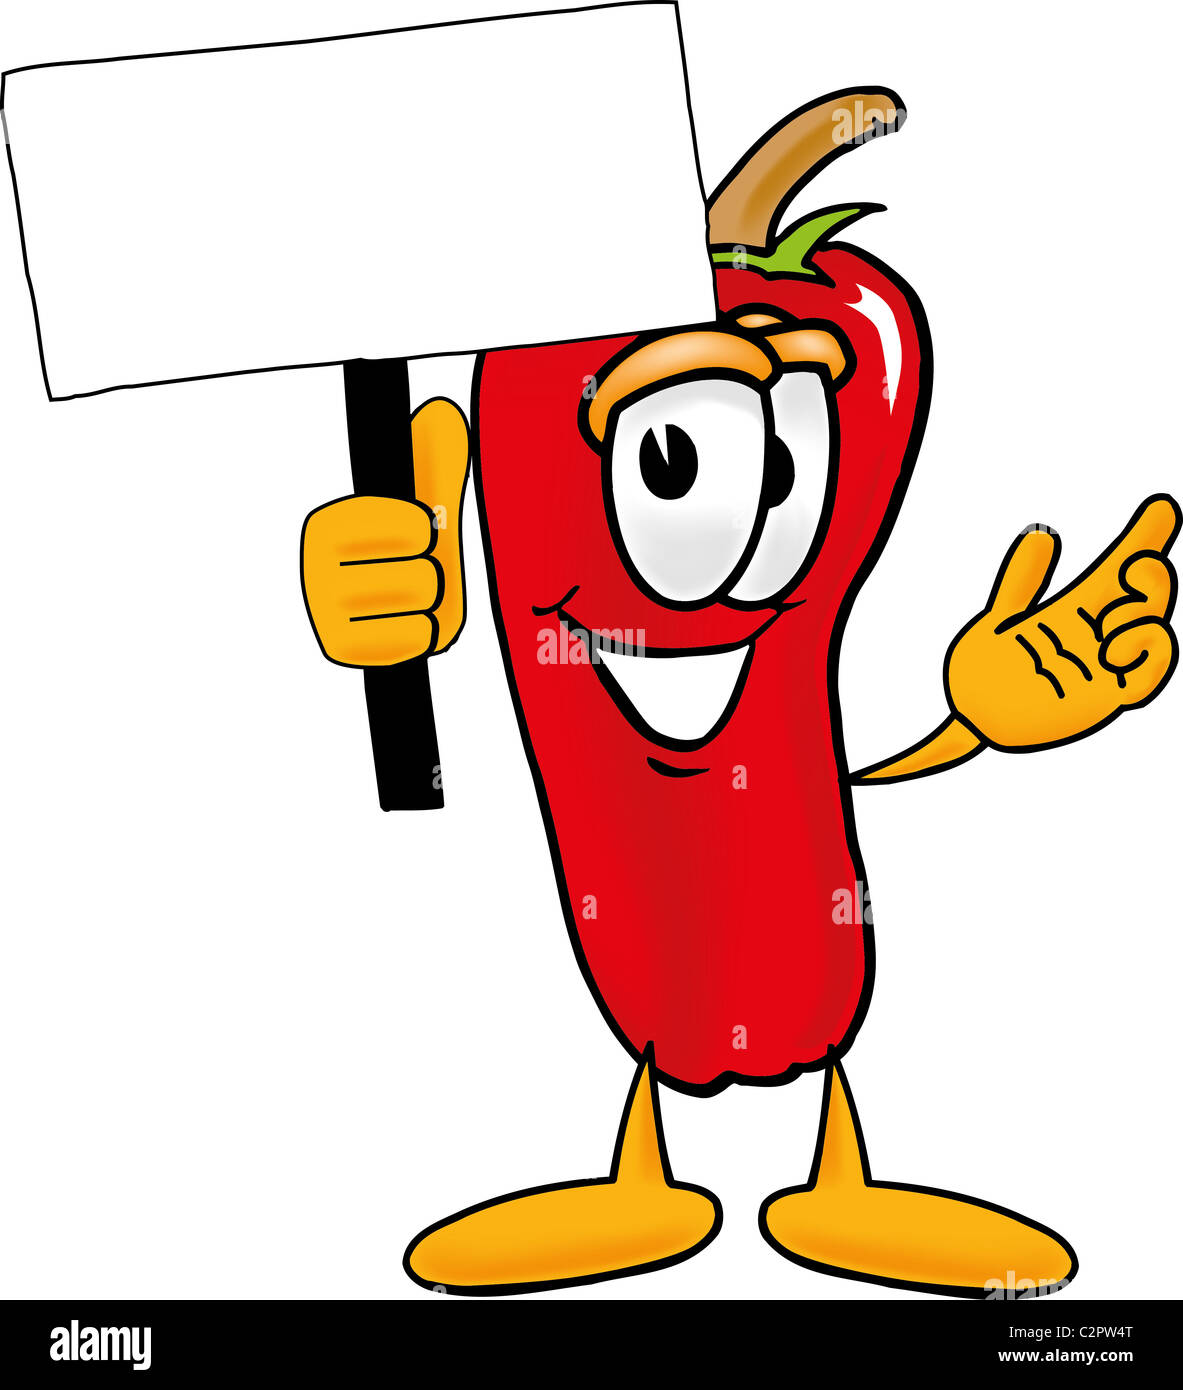 Cartoon Chili Pepper Holding a Sign for Mexican Food Stock Photo